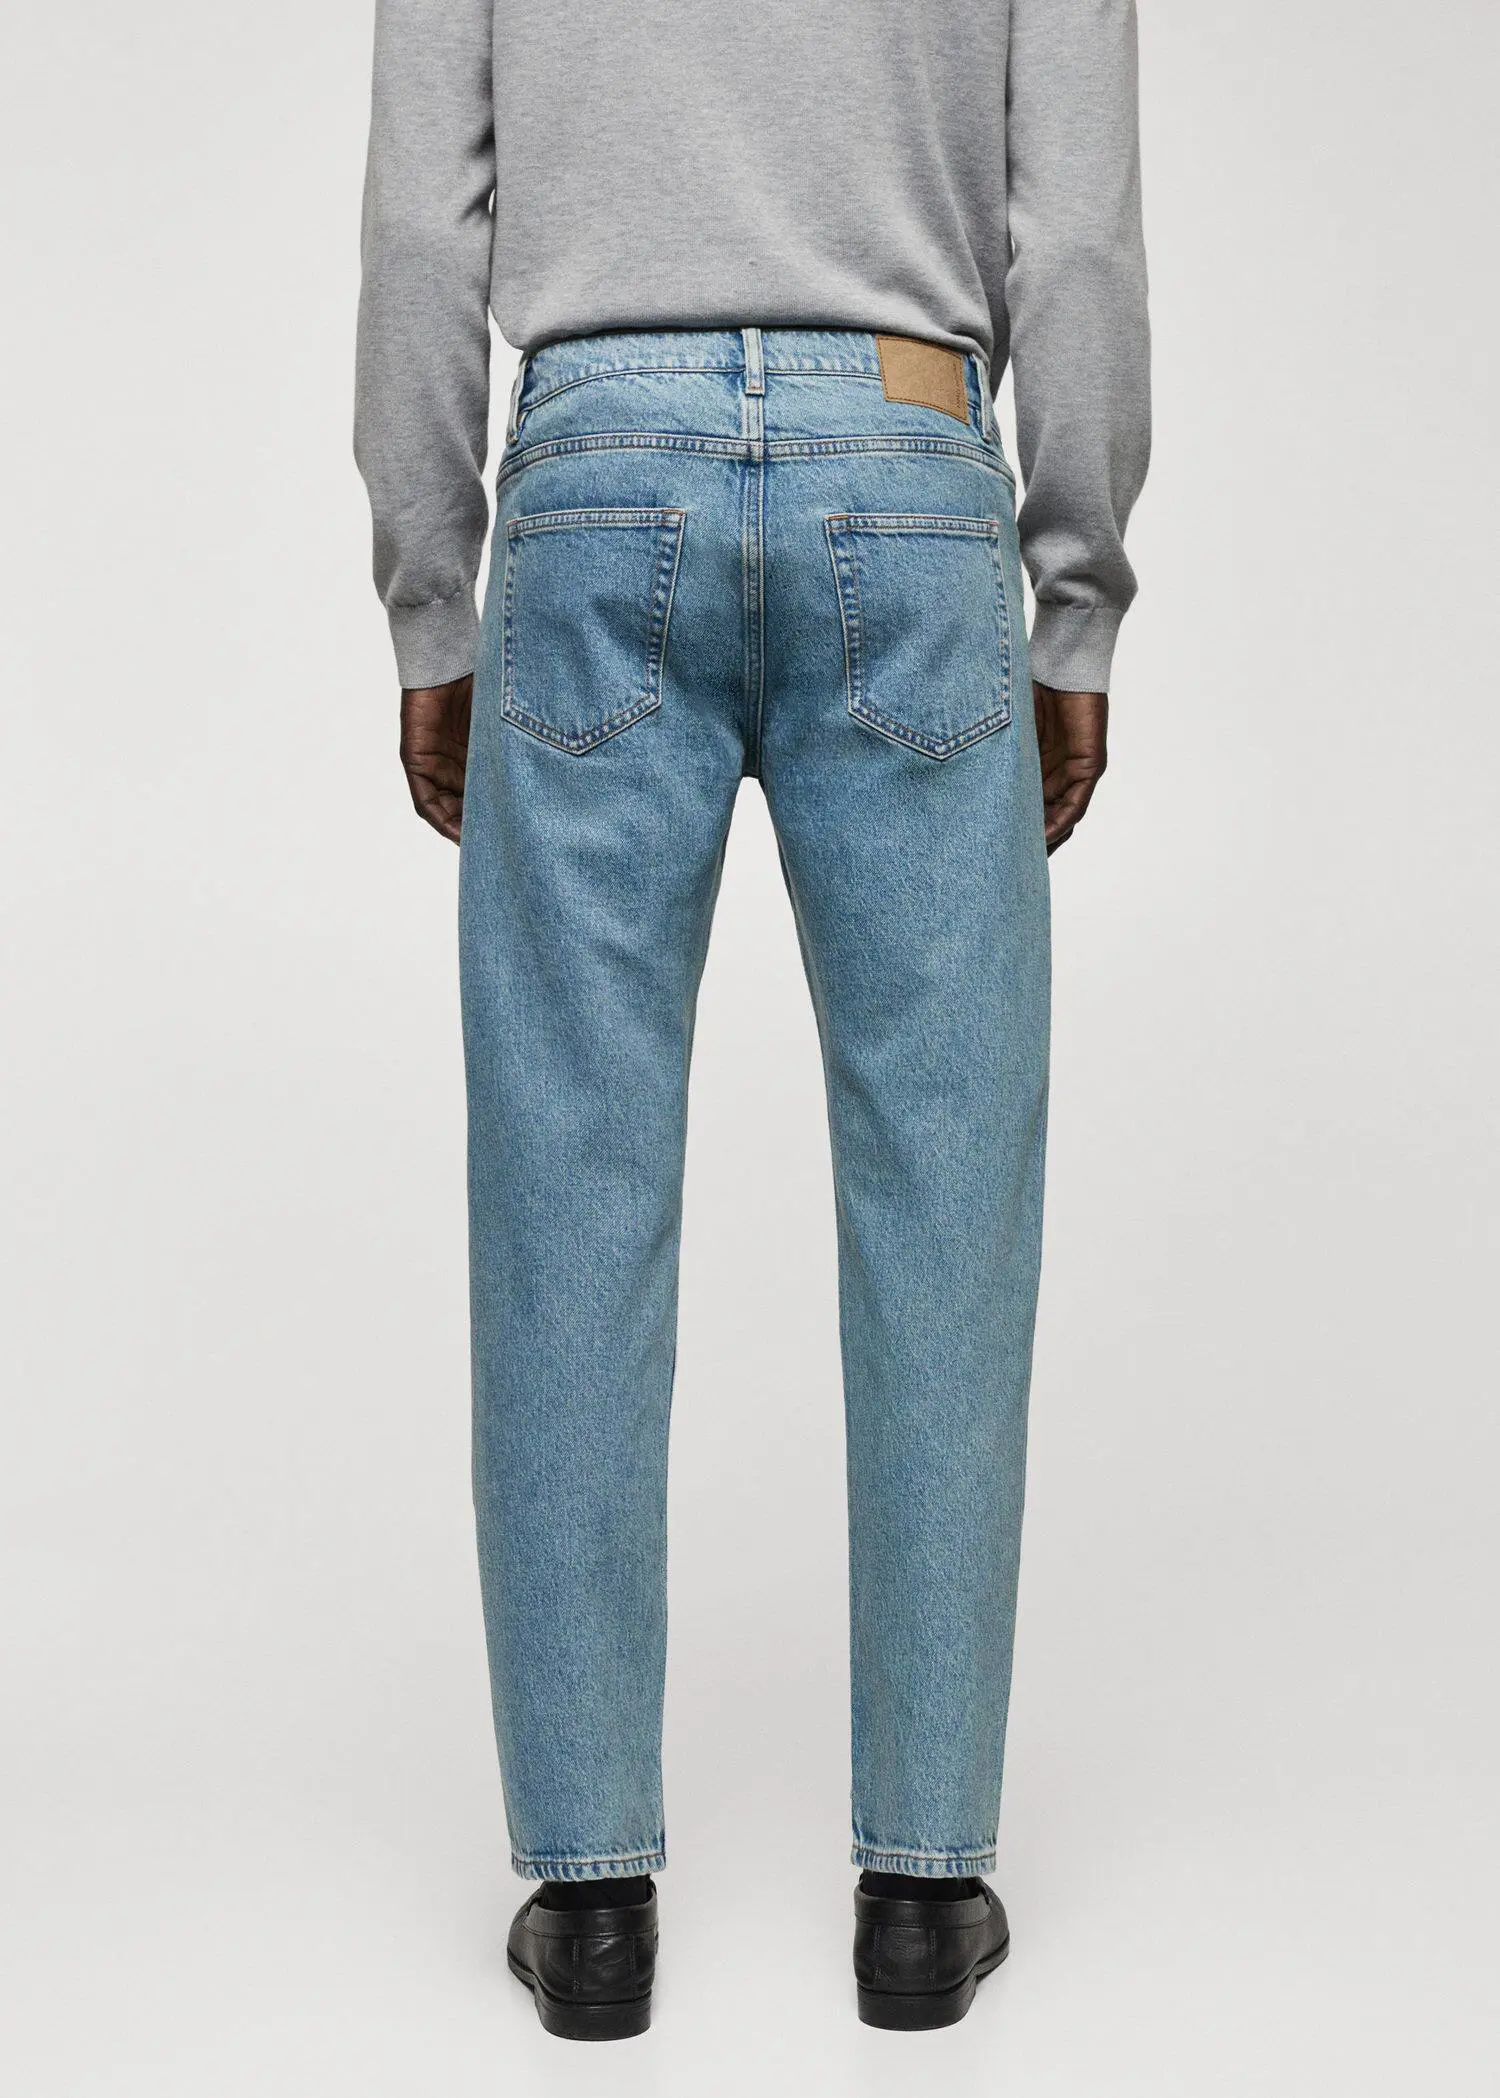 Mango Ben tapered fit jeans. 3